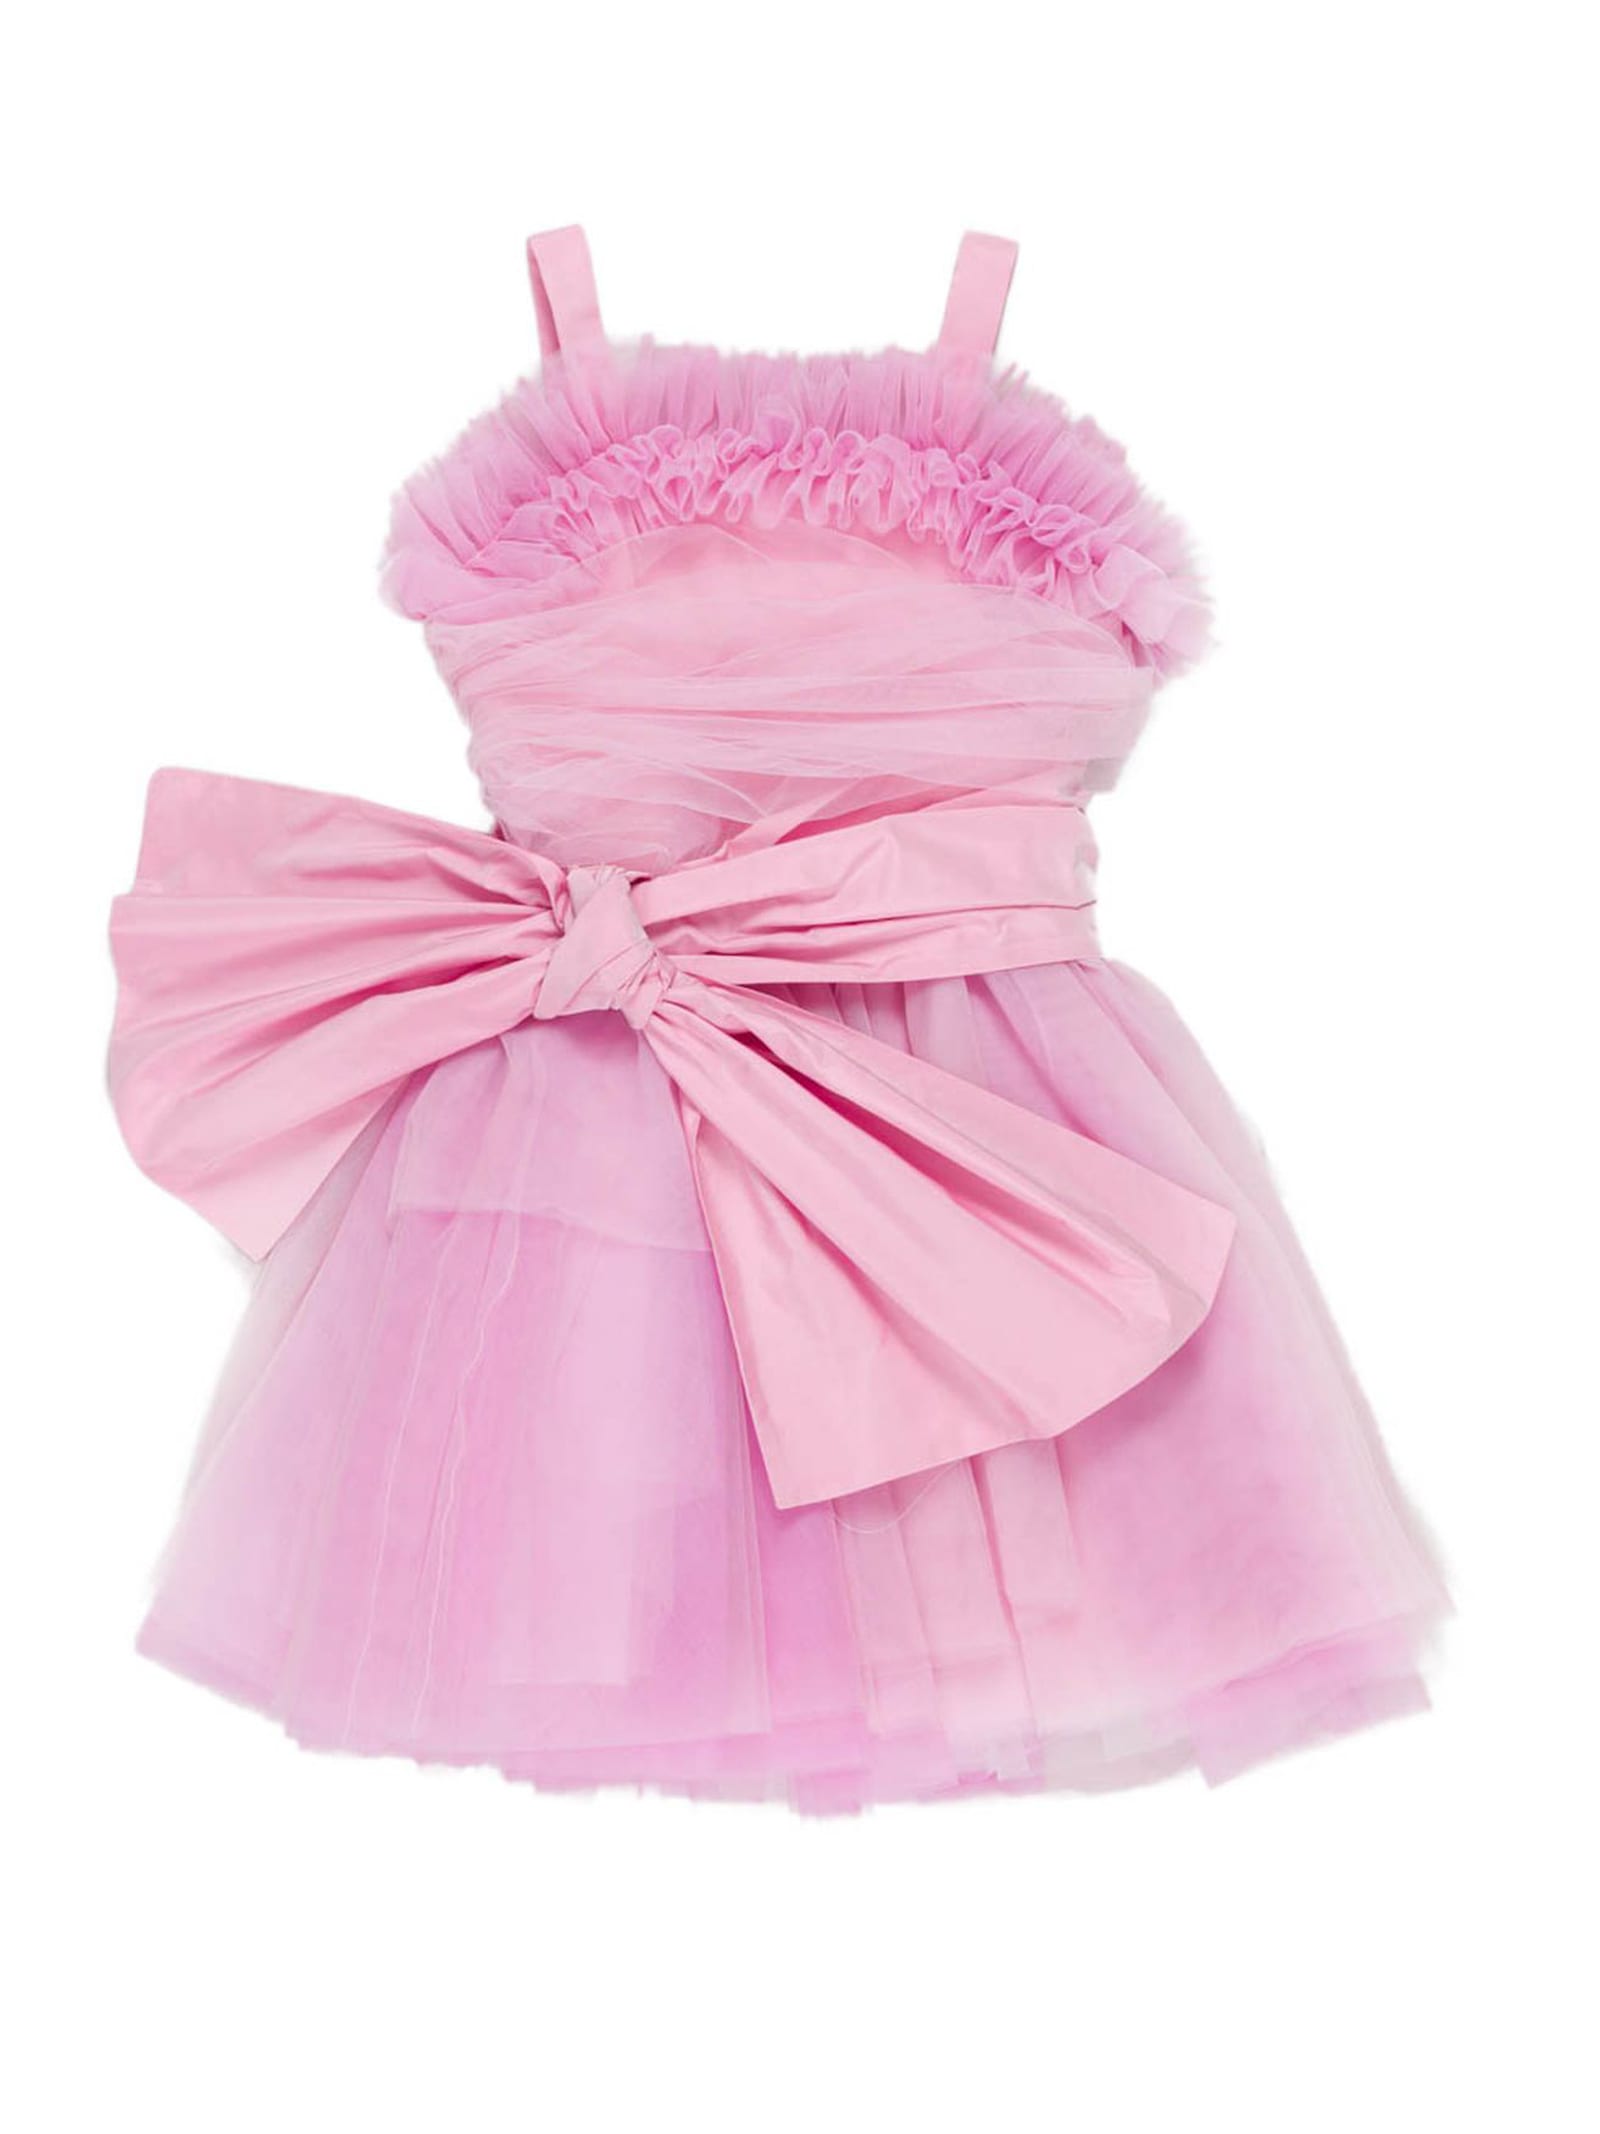 MISS GRANT PINK TULLE DRESS